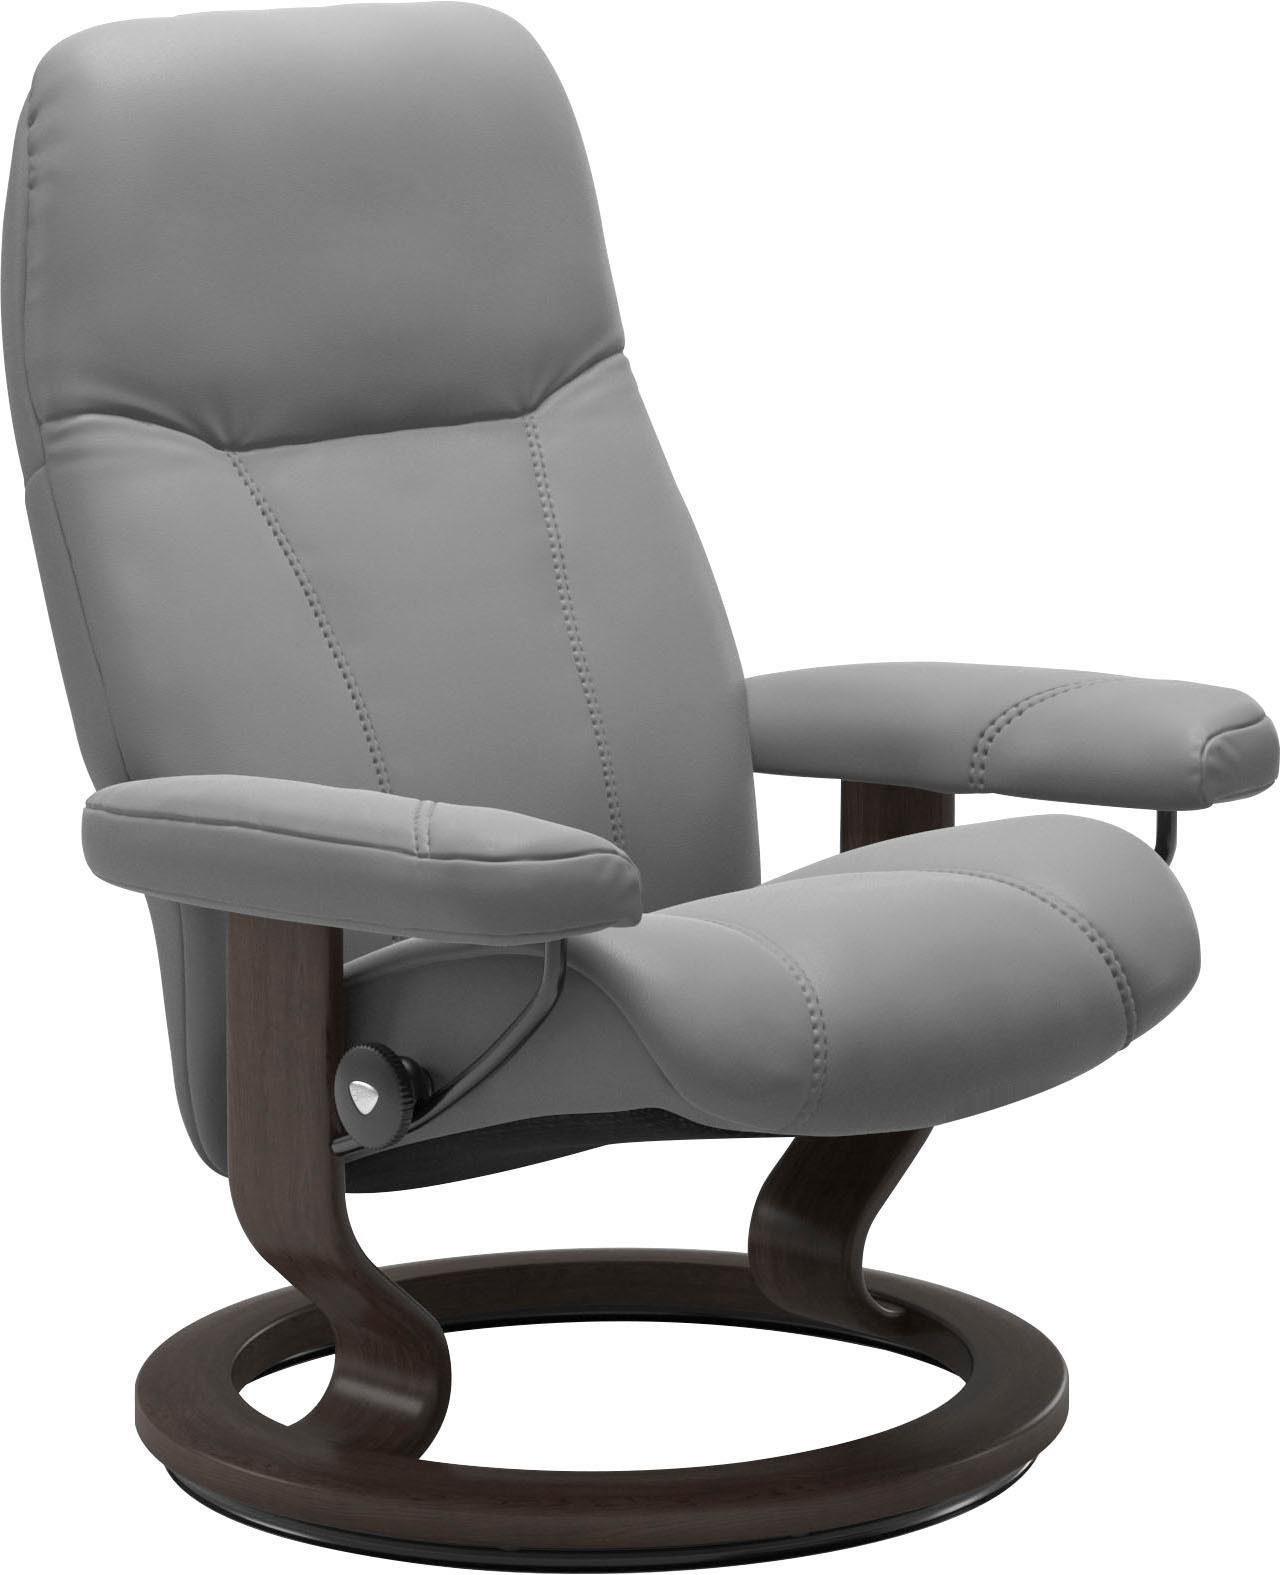 Gestell Wenge mit Base, Größe Consul, Relaxsessel Stressless® M, Classic